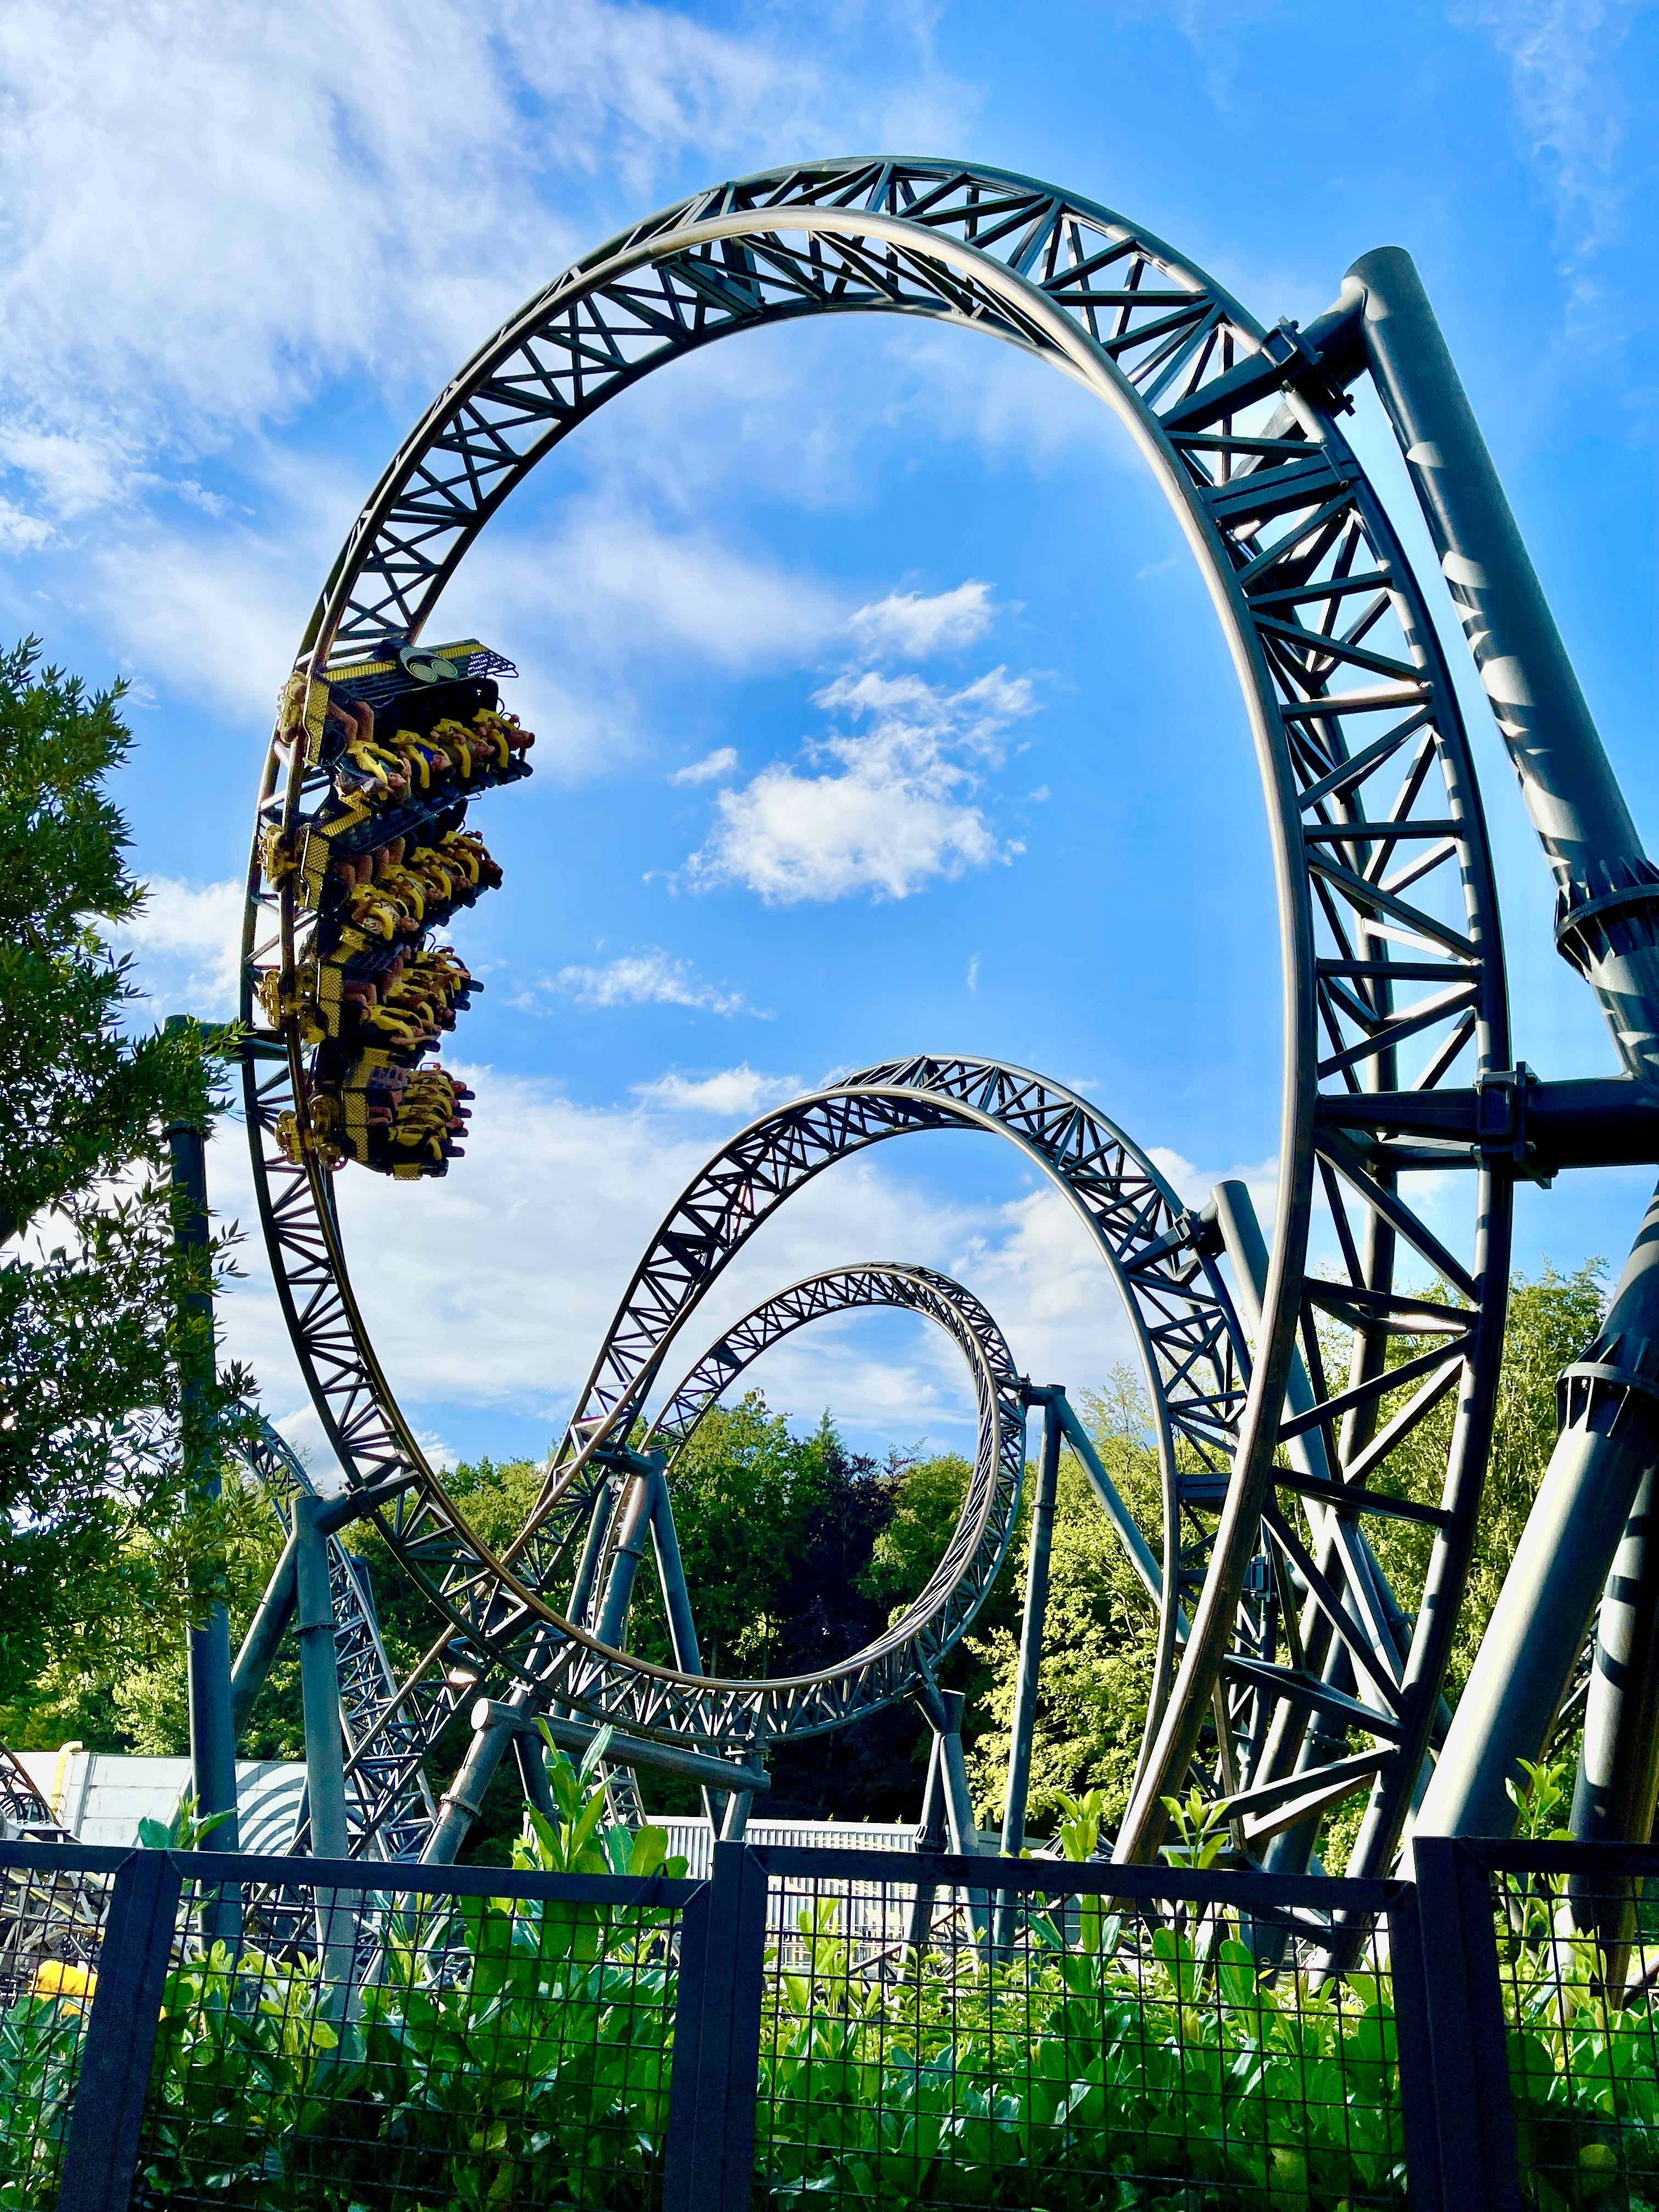 green and brown roller coaster under blue sky during daytime